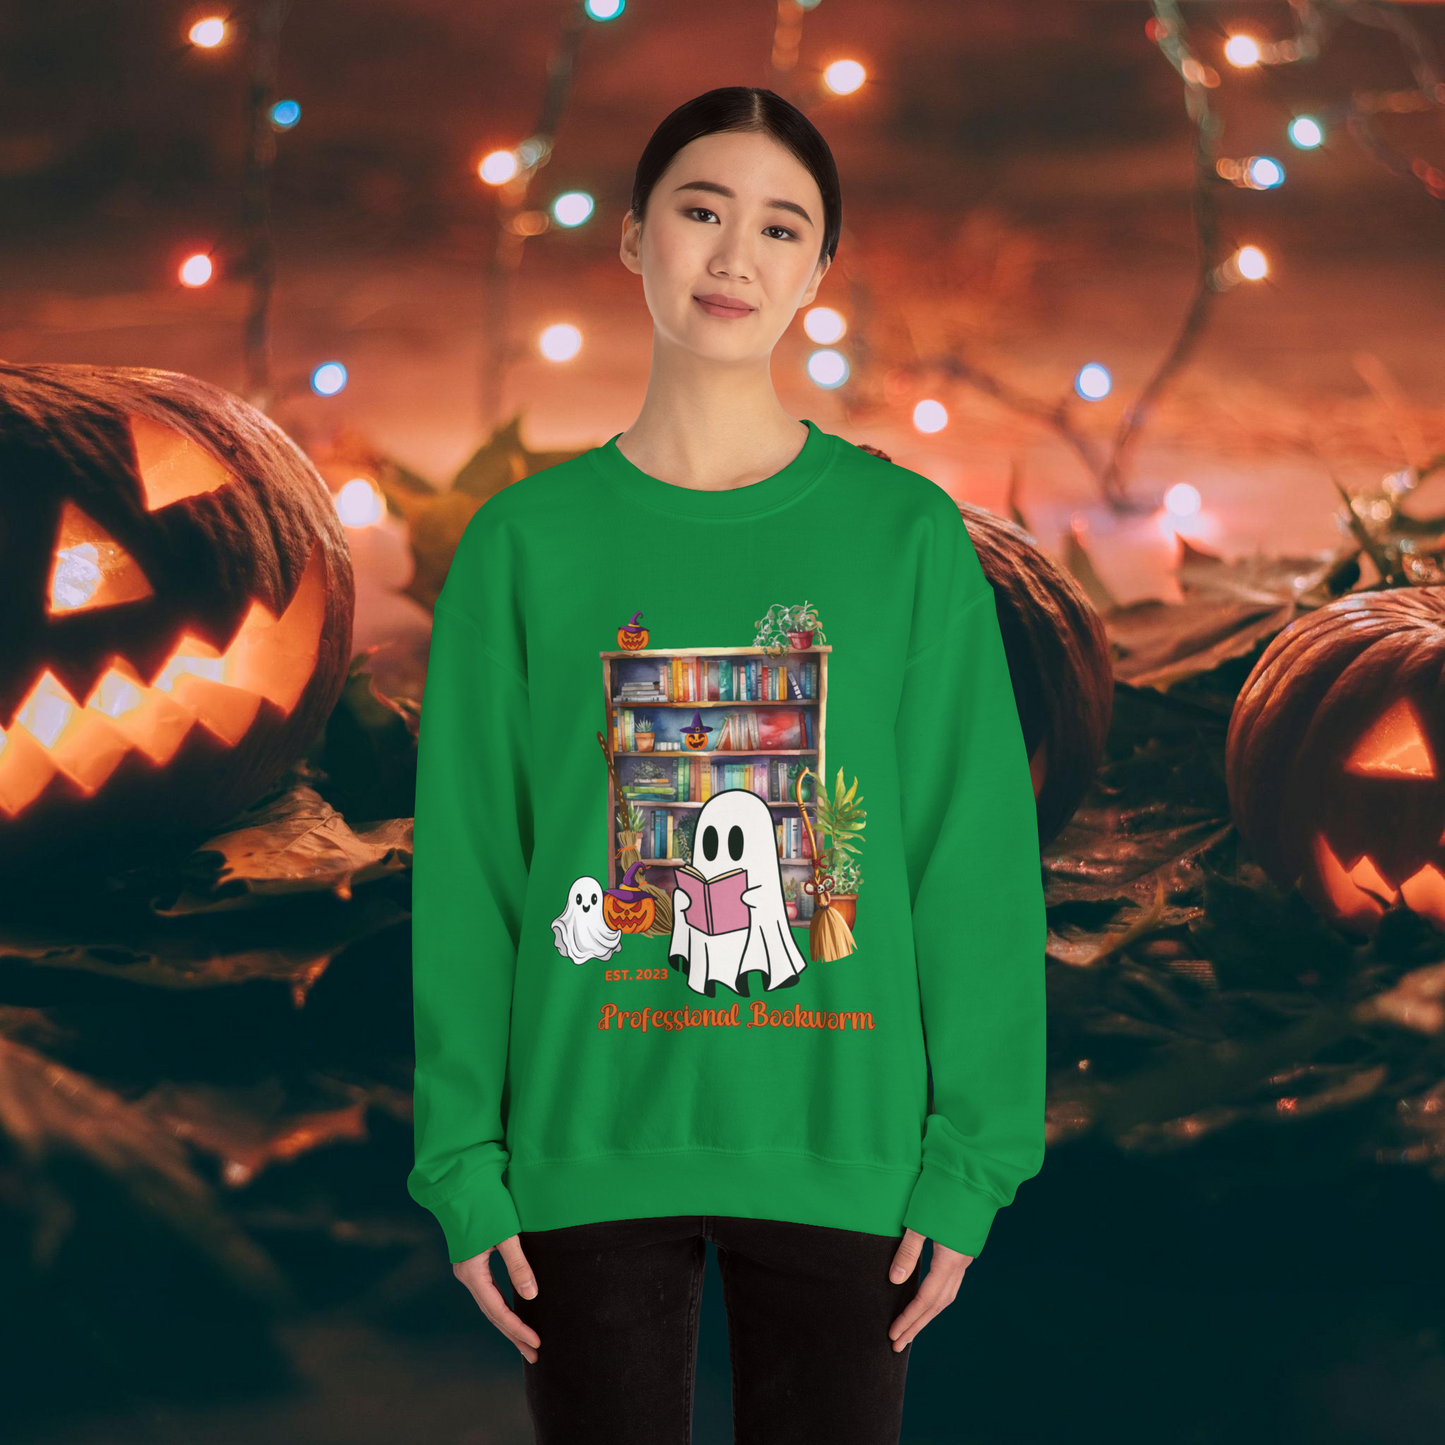 Witchy Gifts for Book Lover Cottagecore Pumpkin Witch Sweatshirt - Bookworm Back To School Reading Fall Sweater, Perfect Present for Bookworm Aunt's Birthday Sweatshirt   